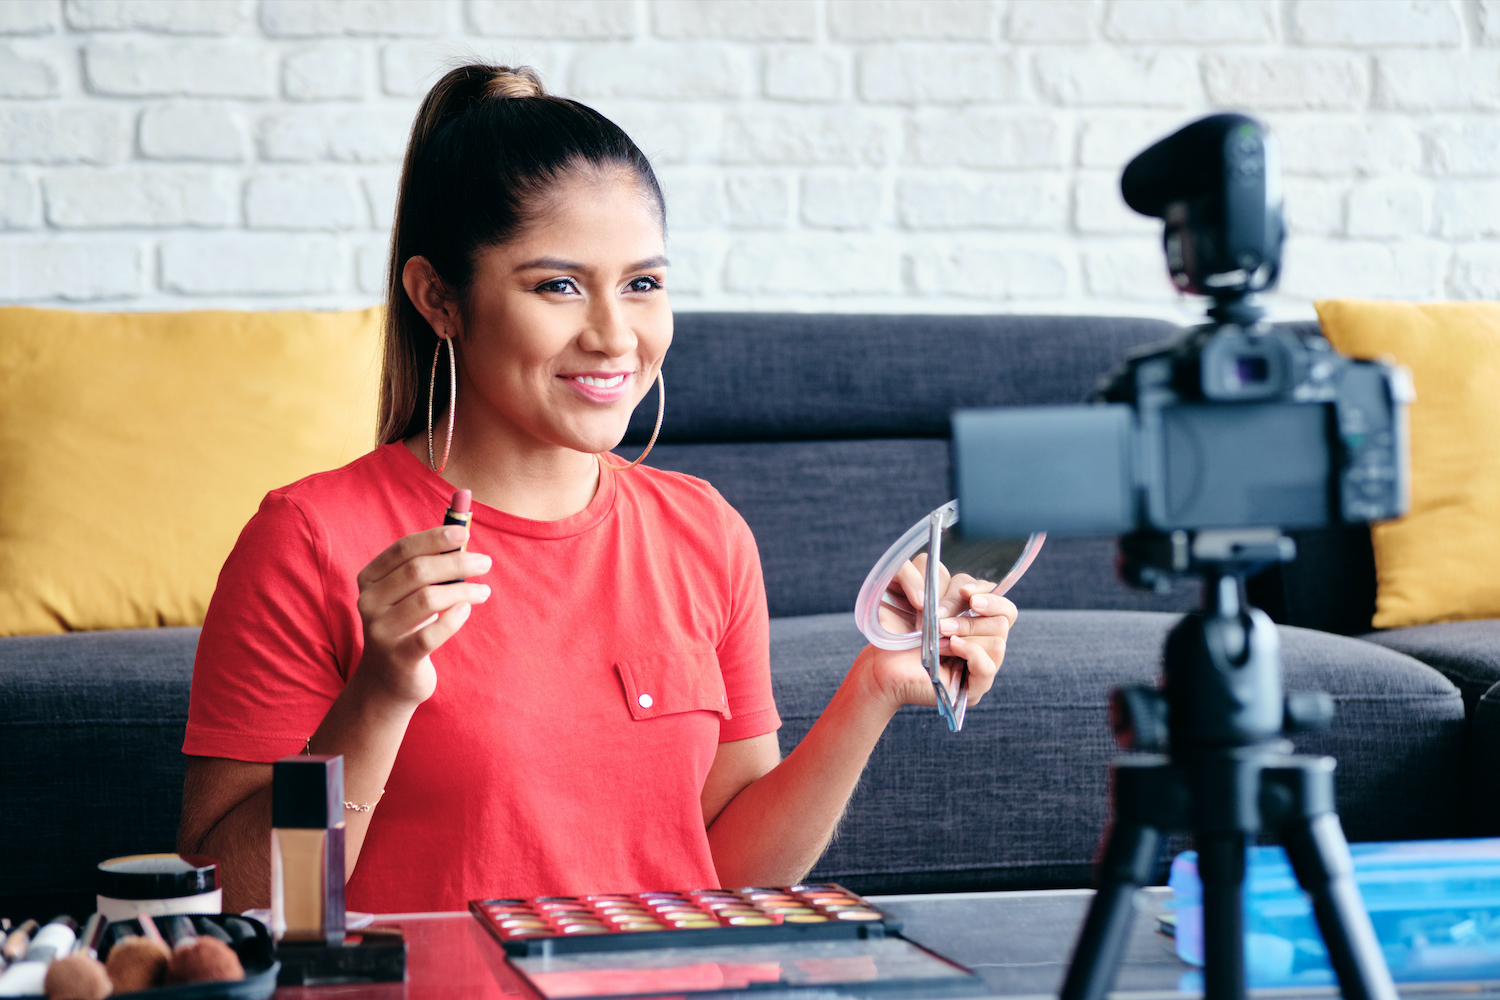  A young woman is sitting in front of a camera and talking while holding a makeup product in her hand.